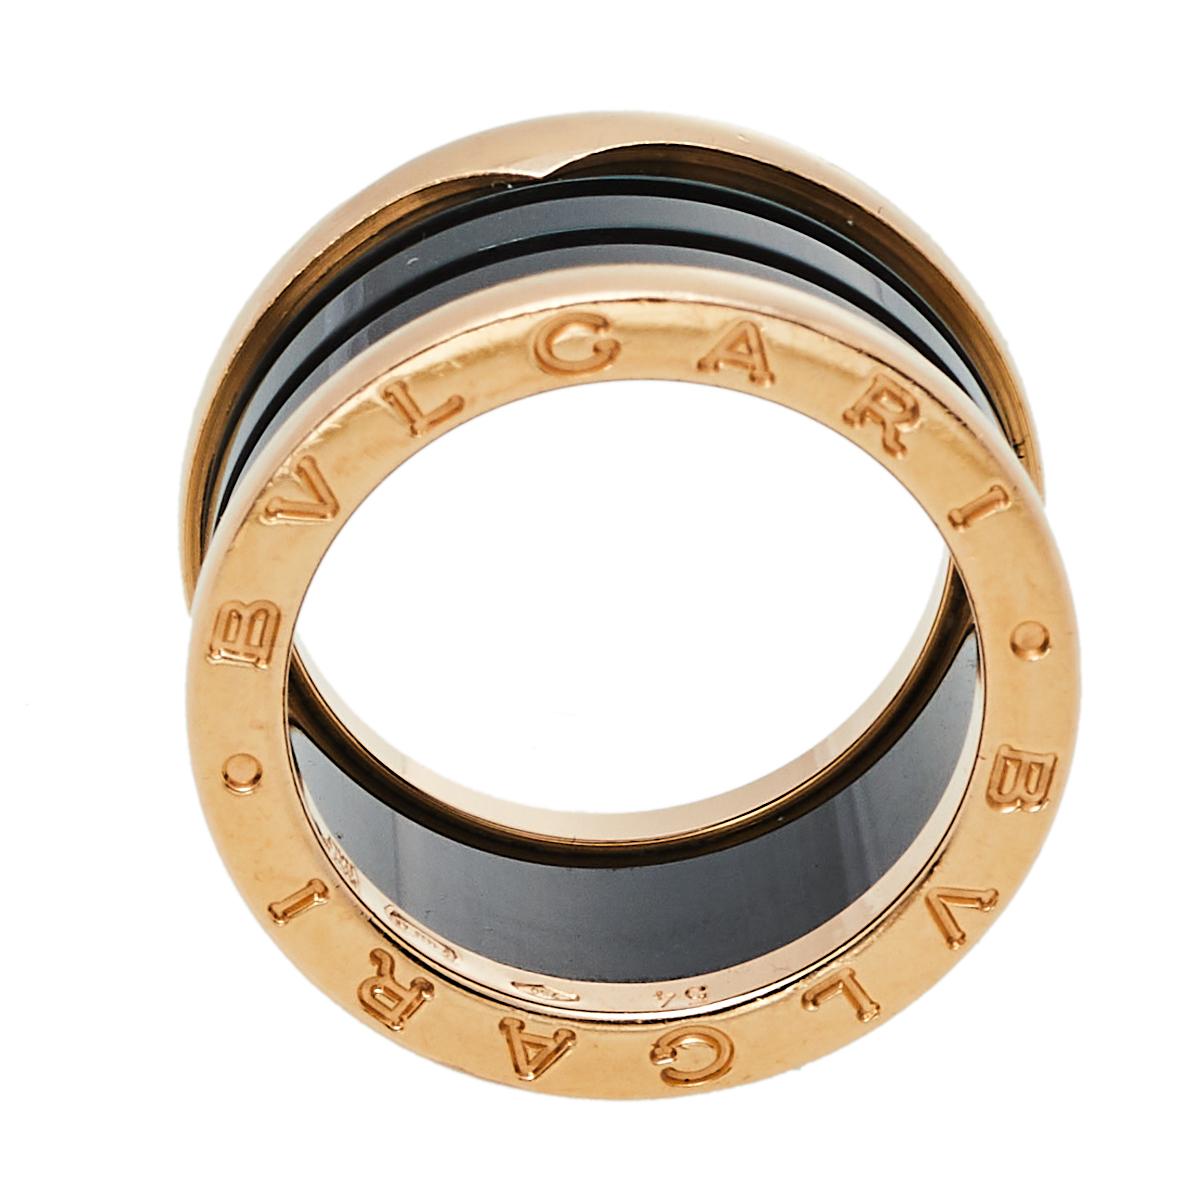 For the woman who has a refined taste in fine jewelry, Bvlgari brings her this immaculately crafted ring that has been made to be praised. Crafted from 18k rose gold, this Bvlgari B.Zero1 ring features four black ceramic bands stacked on one